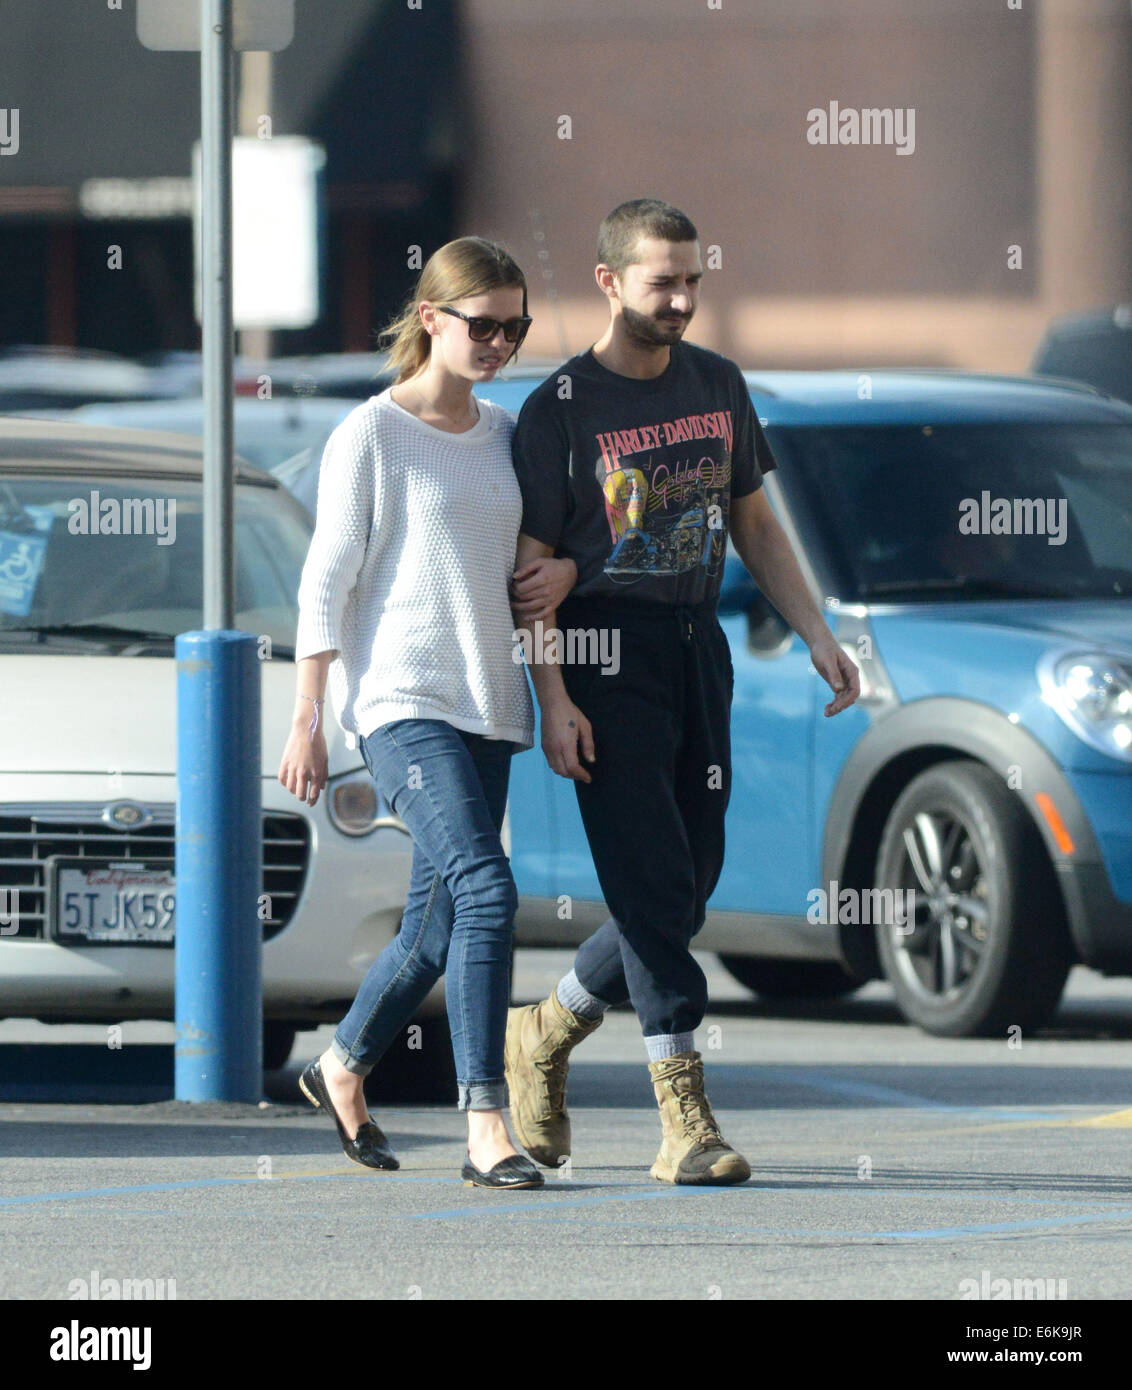 Shia LaBeouf and Mia Goth went on a friendly and romantic trip for smoothies  Featuring: Shia LaBeouf,Mia Goth Where: Los Angeles, California, United States When: 17 Feb 2014 Stock Photo